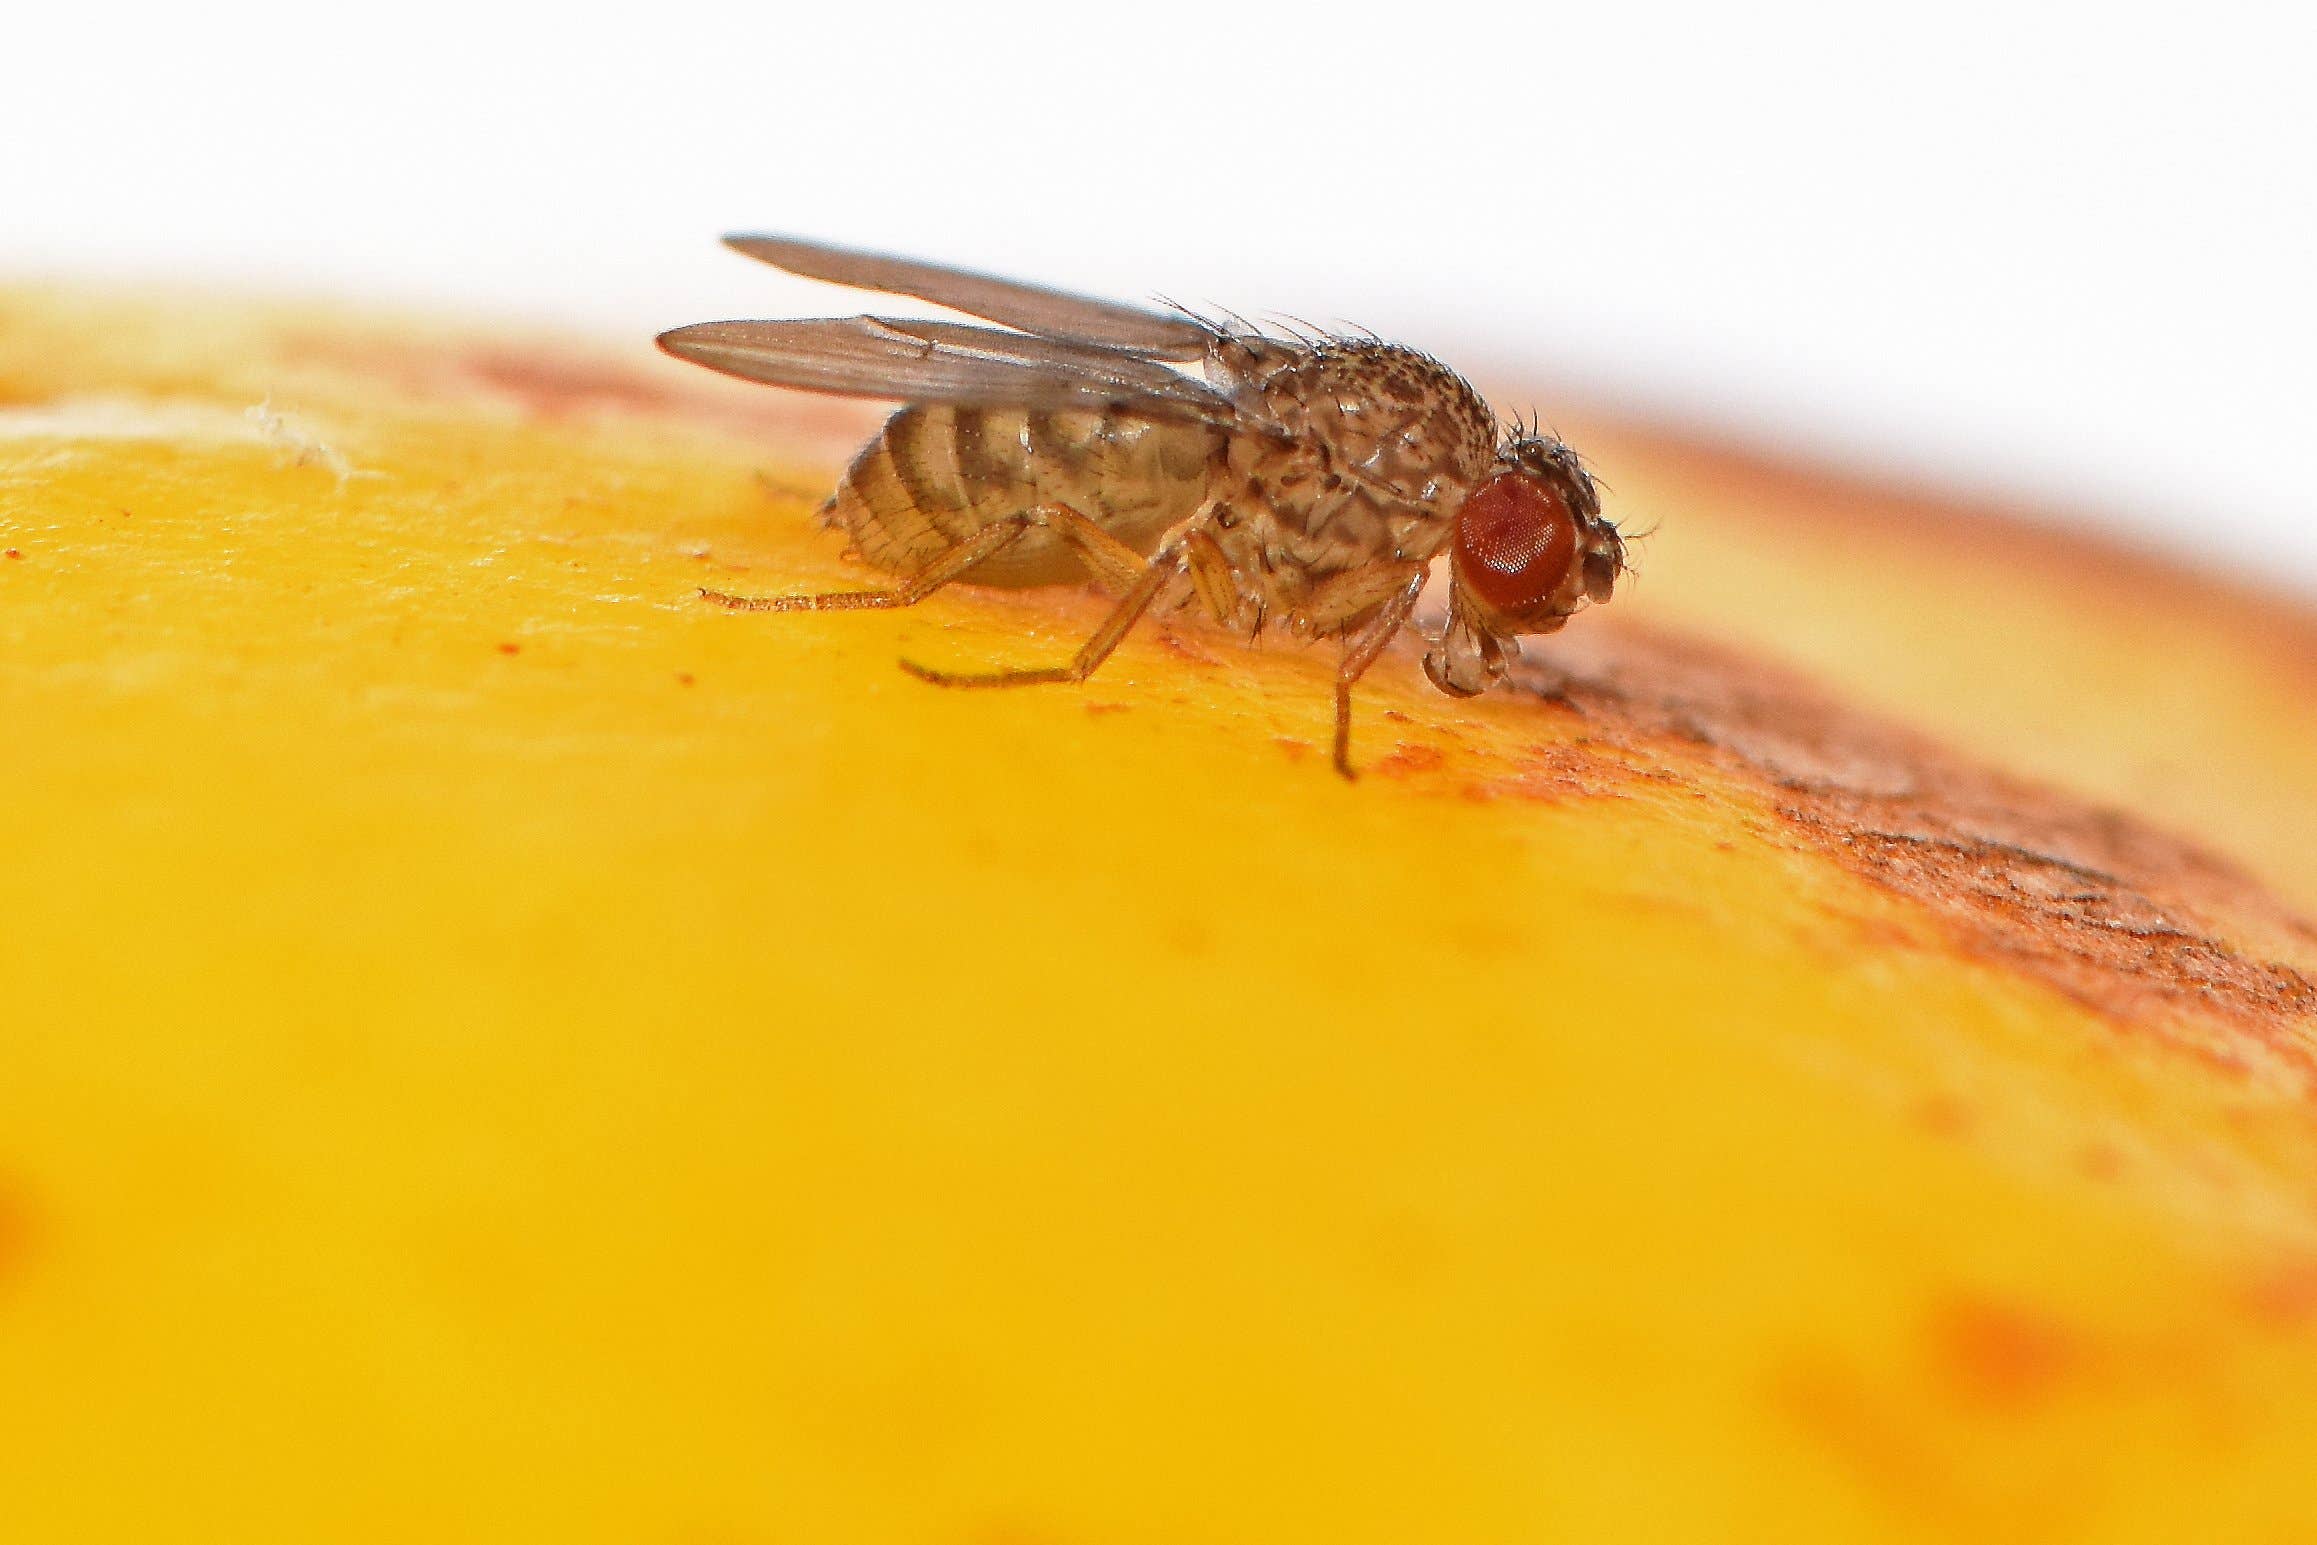 Virgin birth at Cambridge thanks to genetically modified fruit flies